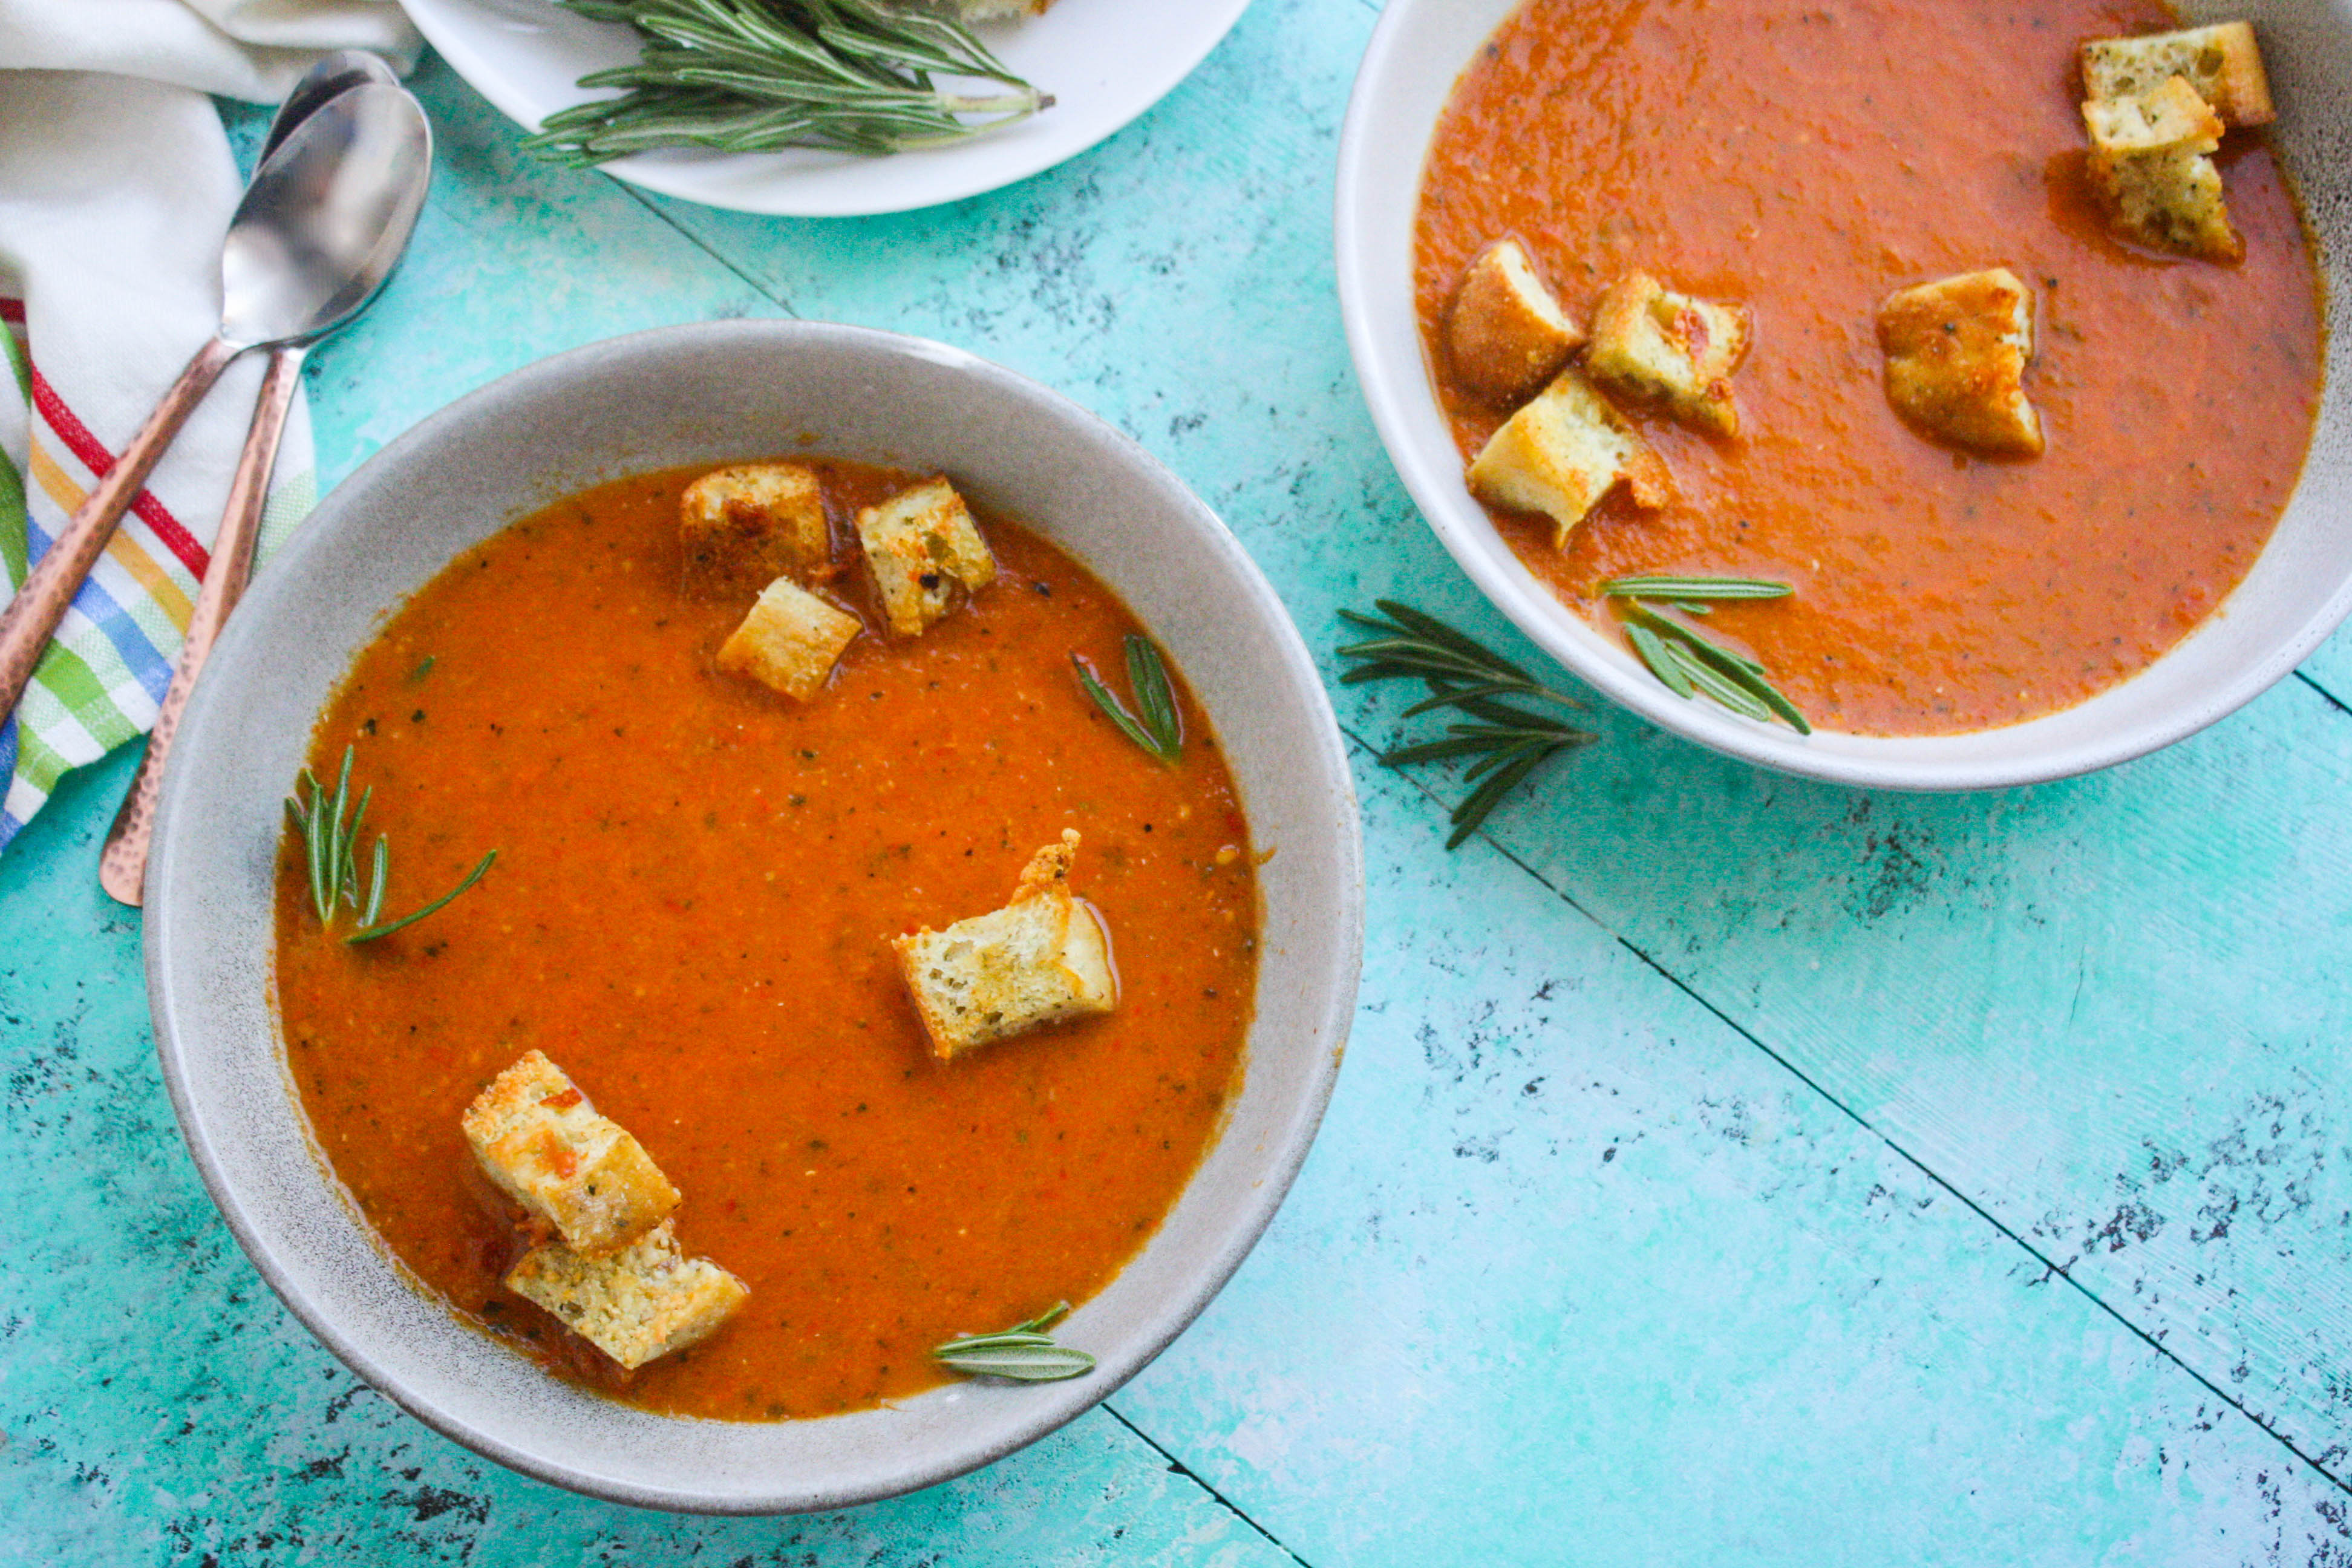 Roasted tomato and vegetable soup with gin drizzle is a rich, tomato-based soup you'll love. Roasted tomato and vegetable soup with gin drizzle is thick and rich, and so flavorful!